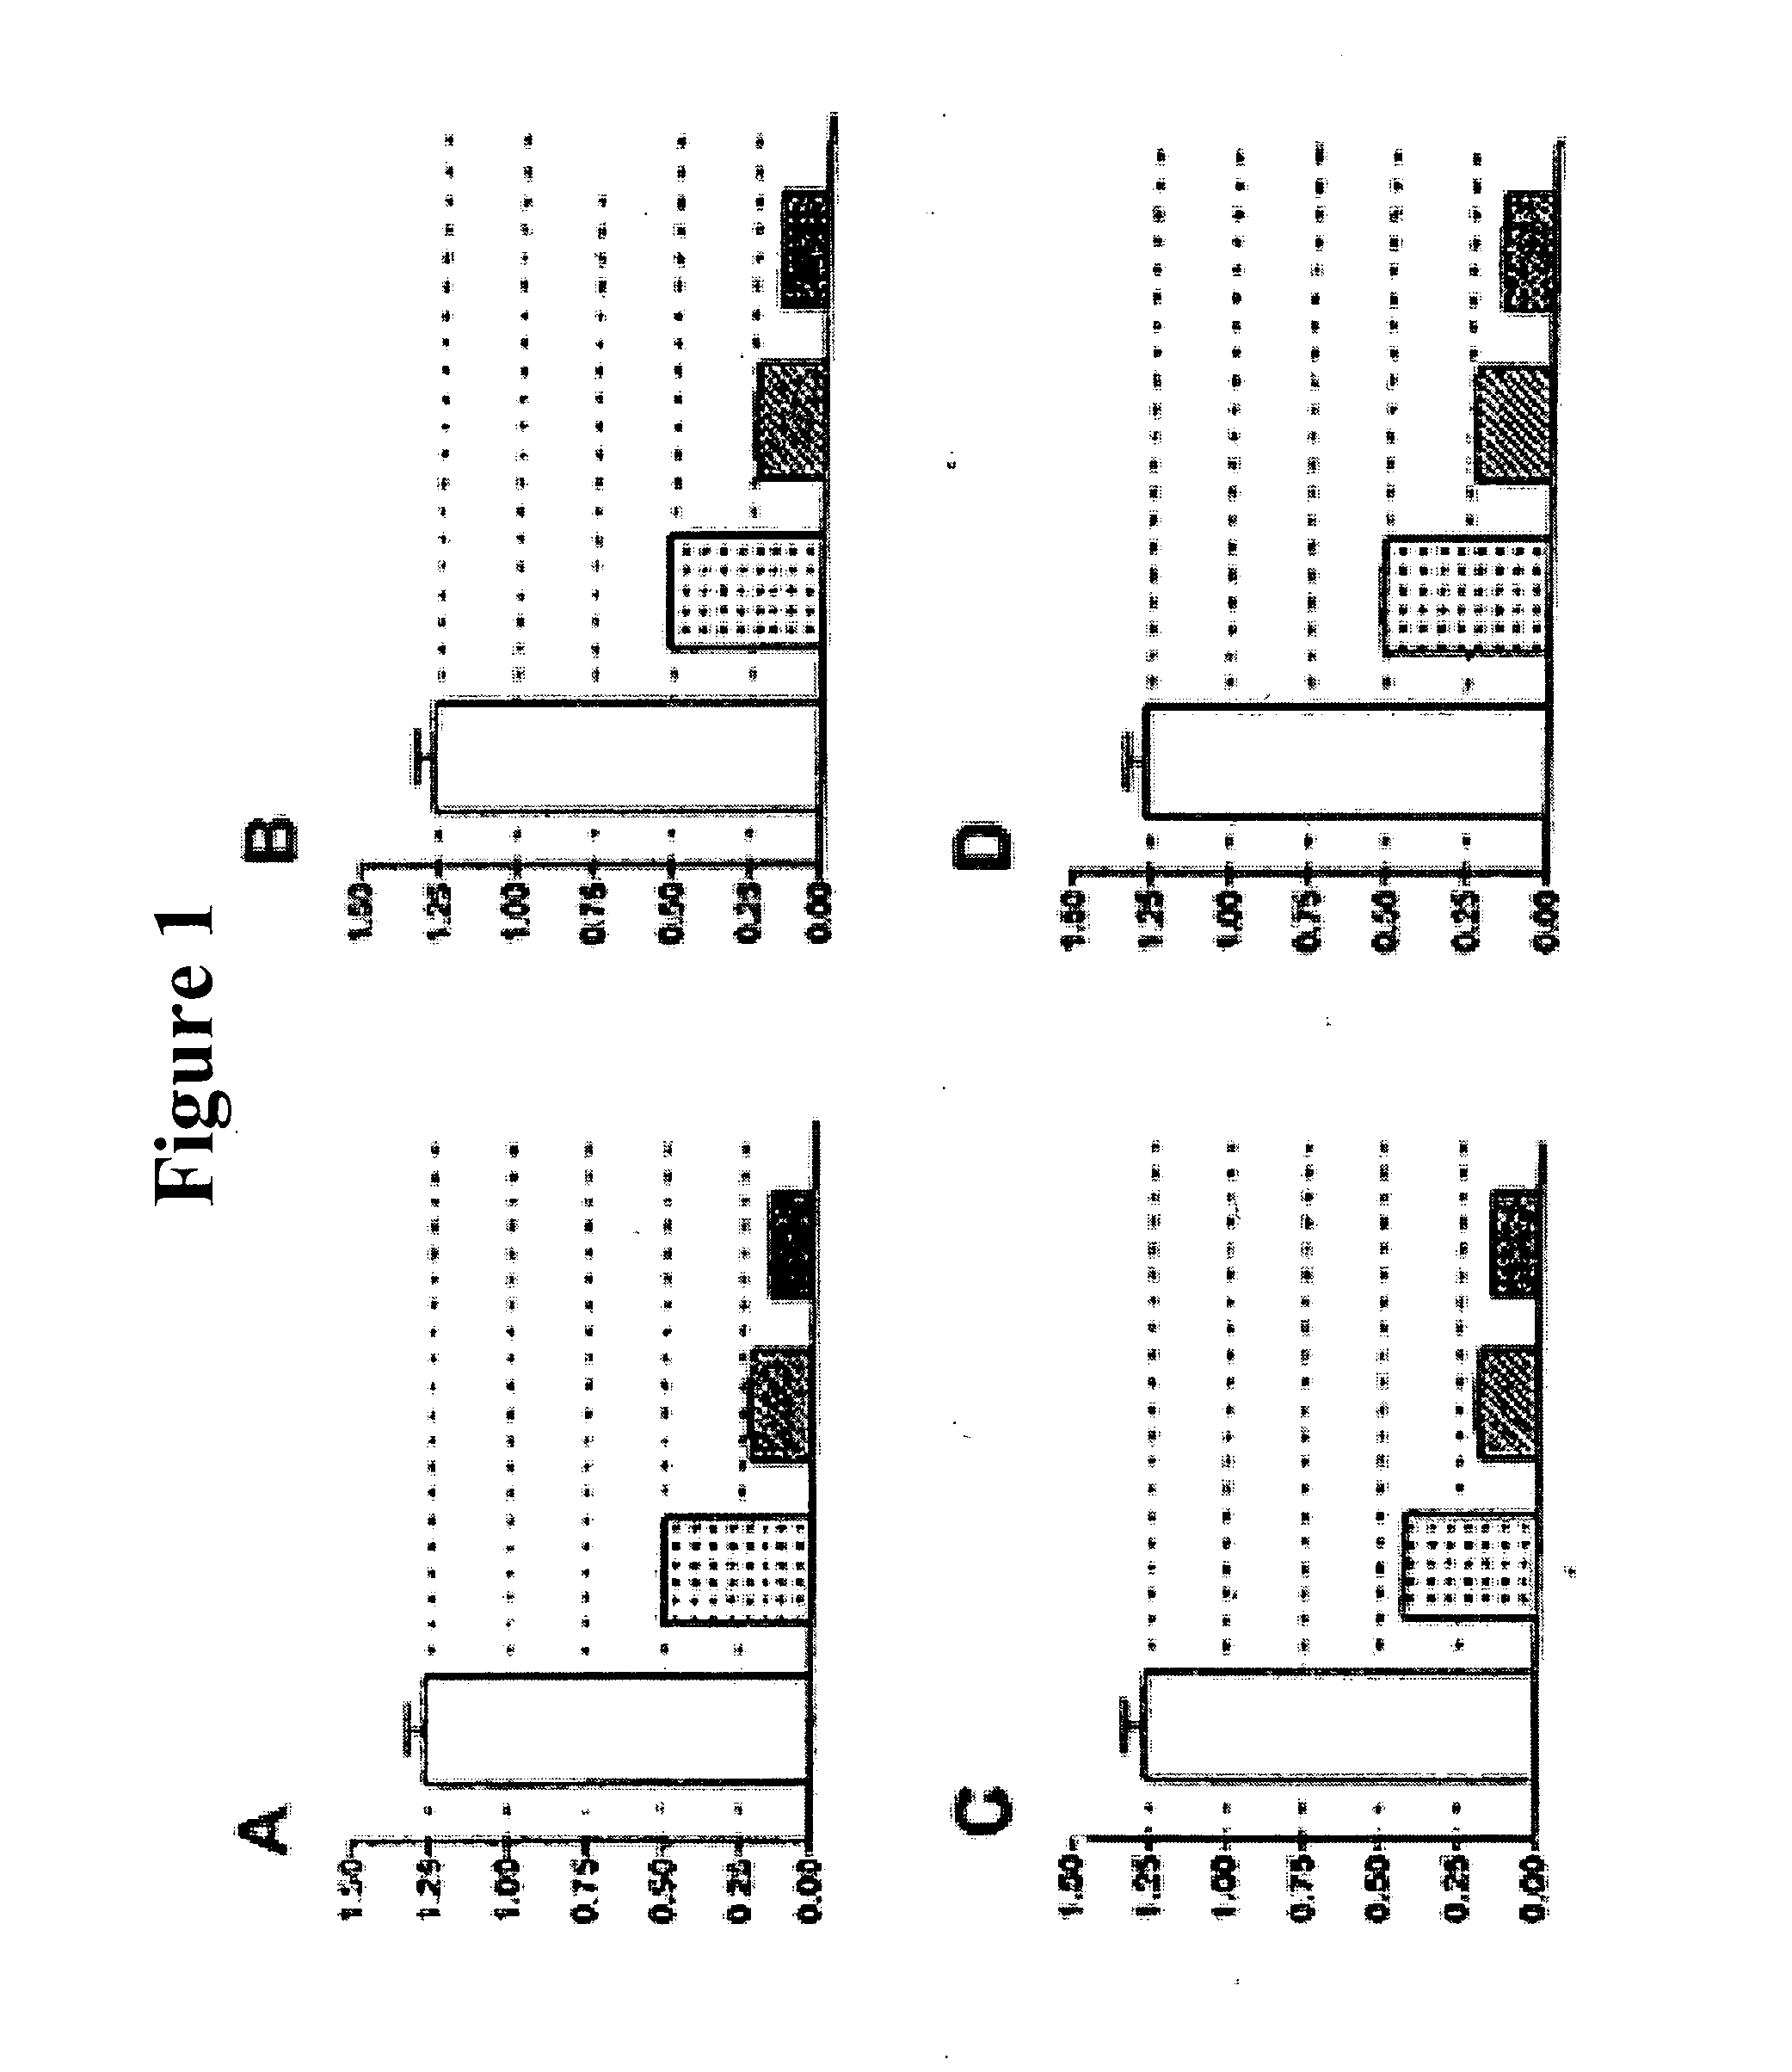 Methods of use for 2,5-dihydroxybenzene sulfonic acid compounds for the treatment of cancer, rosacea and psoriasis